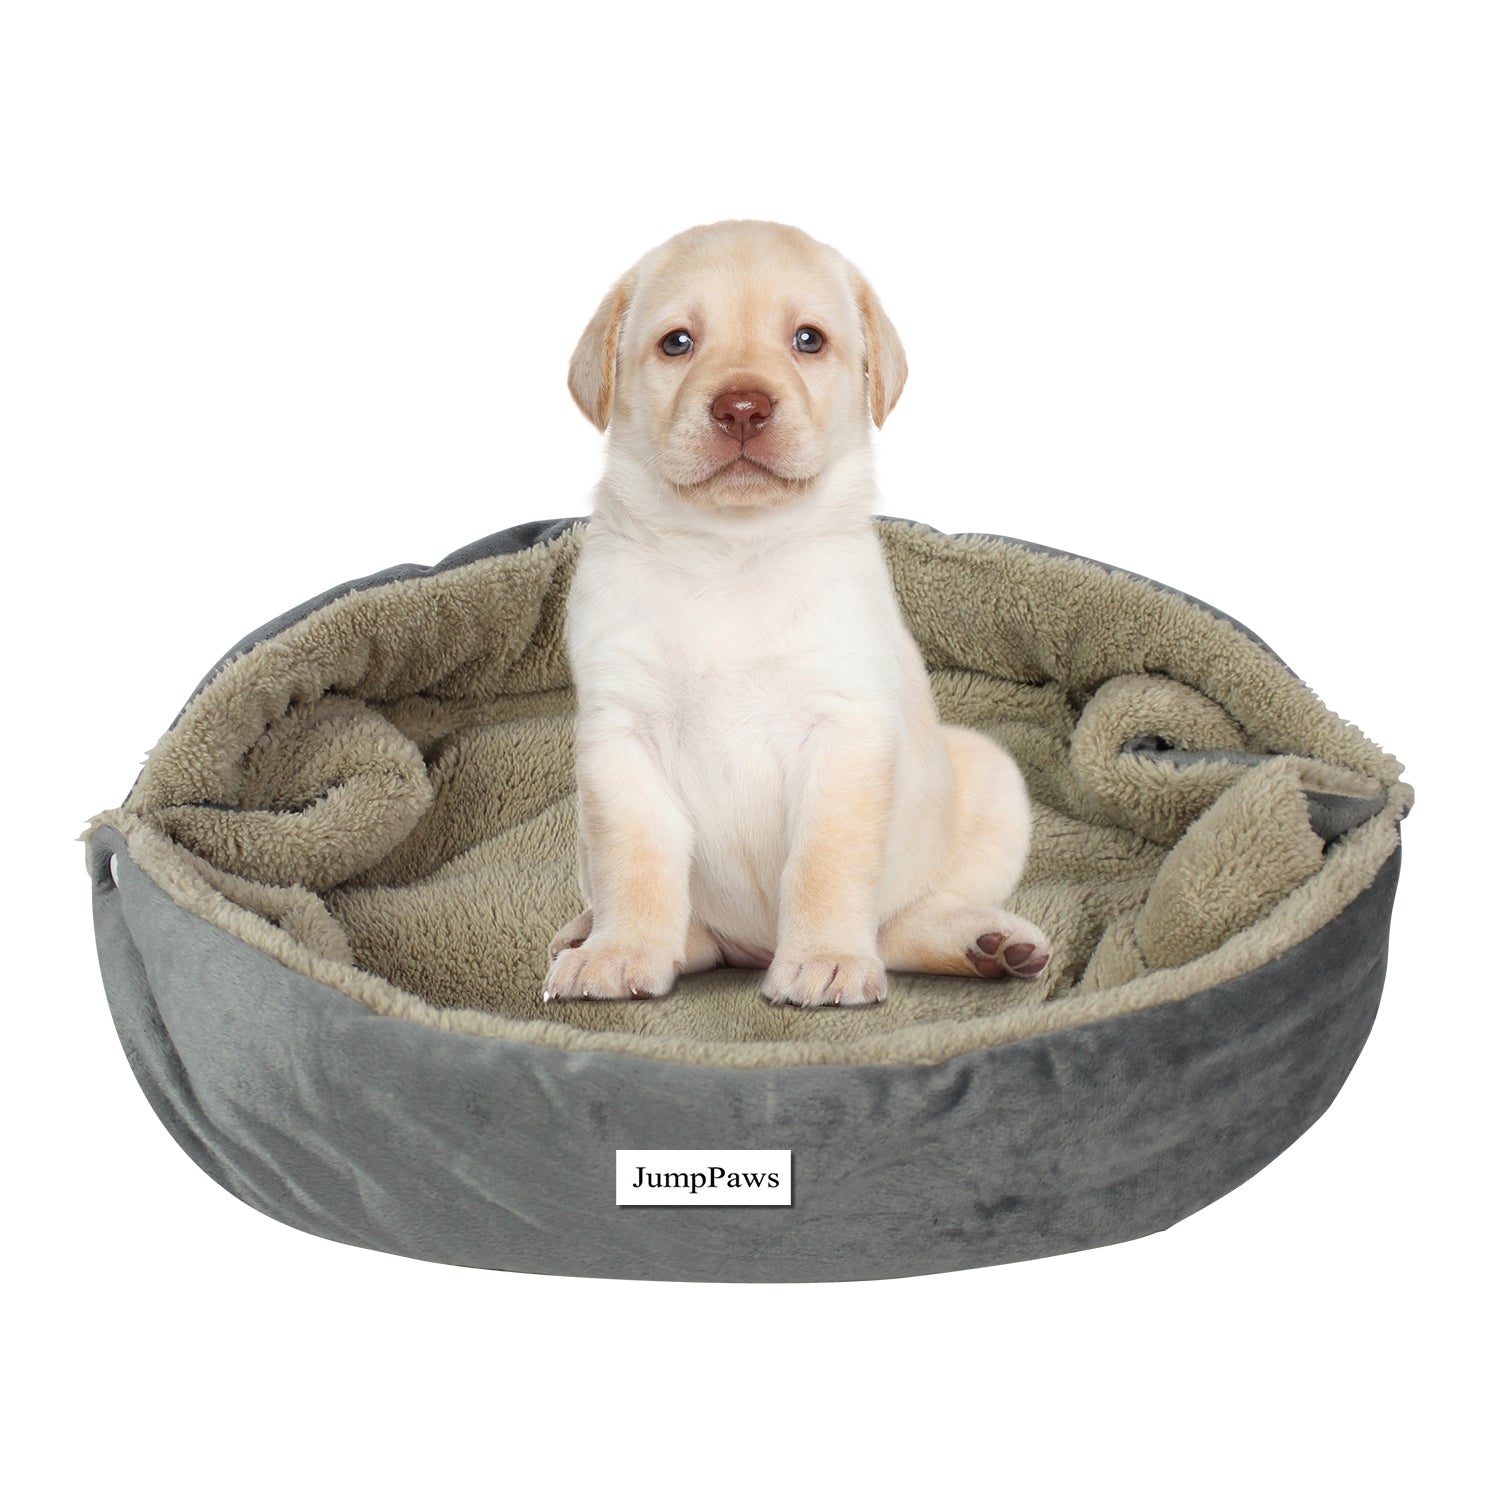 JumpPaws Portable Dog Beds, Comfortable Doggy beds for Medium Dogs, Green & Grey